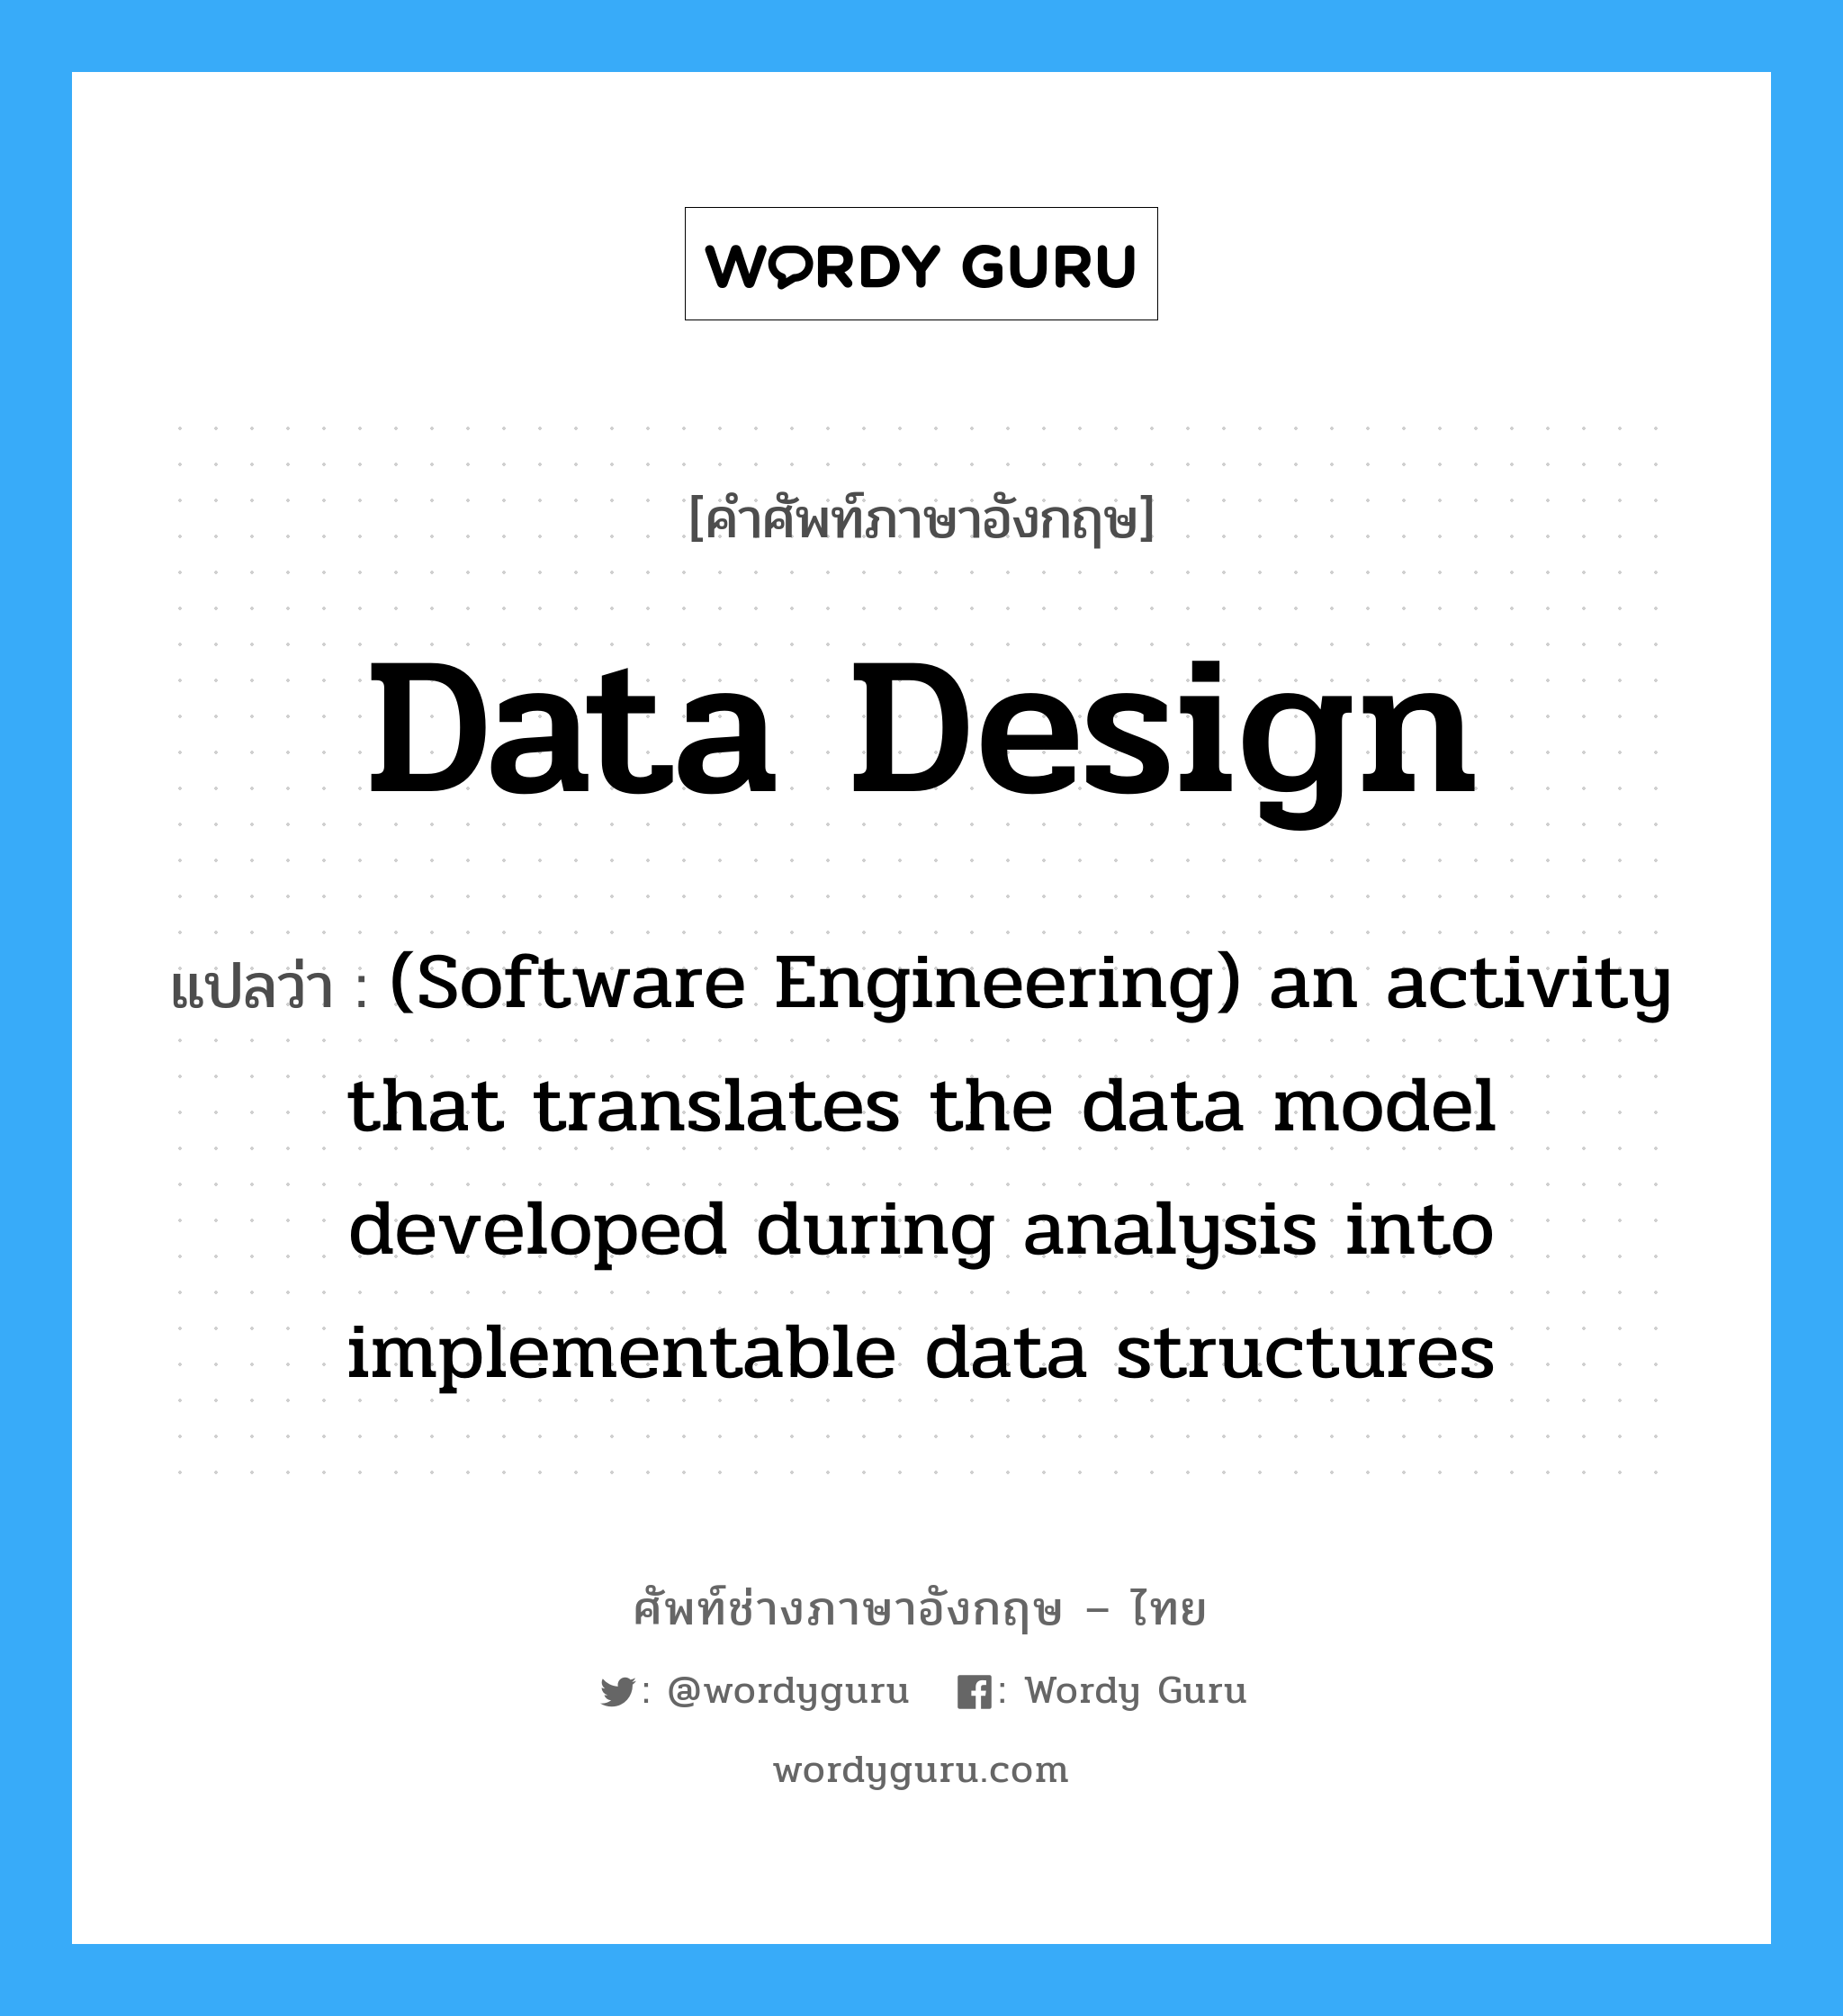 (Software Engineering) an activity that translates the data model developed during analysis into implementable data structures ภาษาอังกฤษ?, คำศัพท์ช่างภาษาอังกฤษ - ไทย (Software Engineering) an activity that translates the data model developed during analysis into implementable data structures คำศัพท์ภาษาอังกฤษ (Software Engineering) an activity that translates the data model developed during analysis into implementable data structures แปลว่า Data design